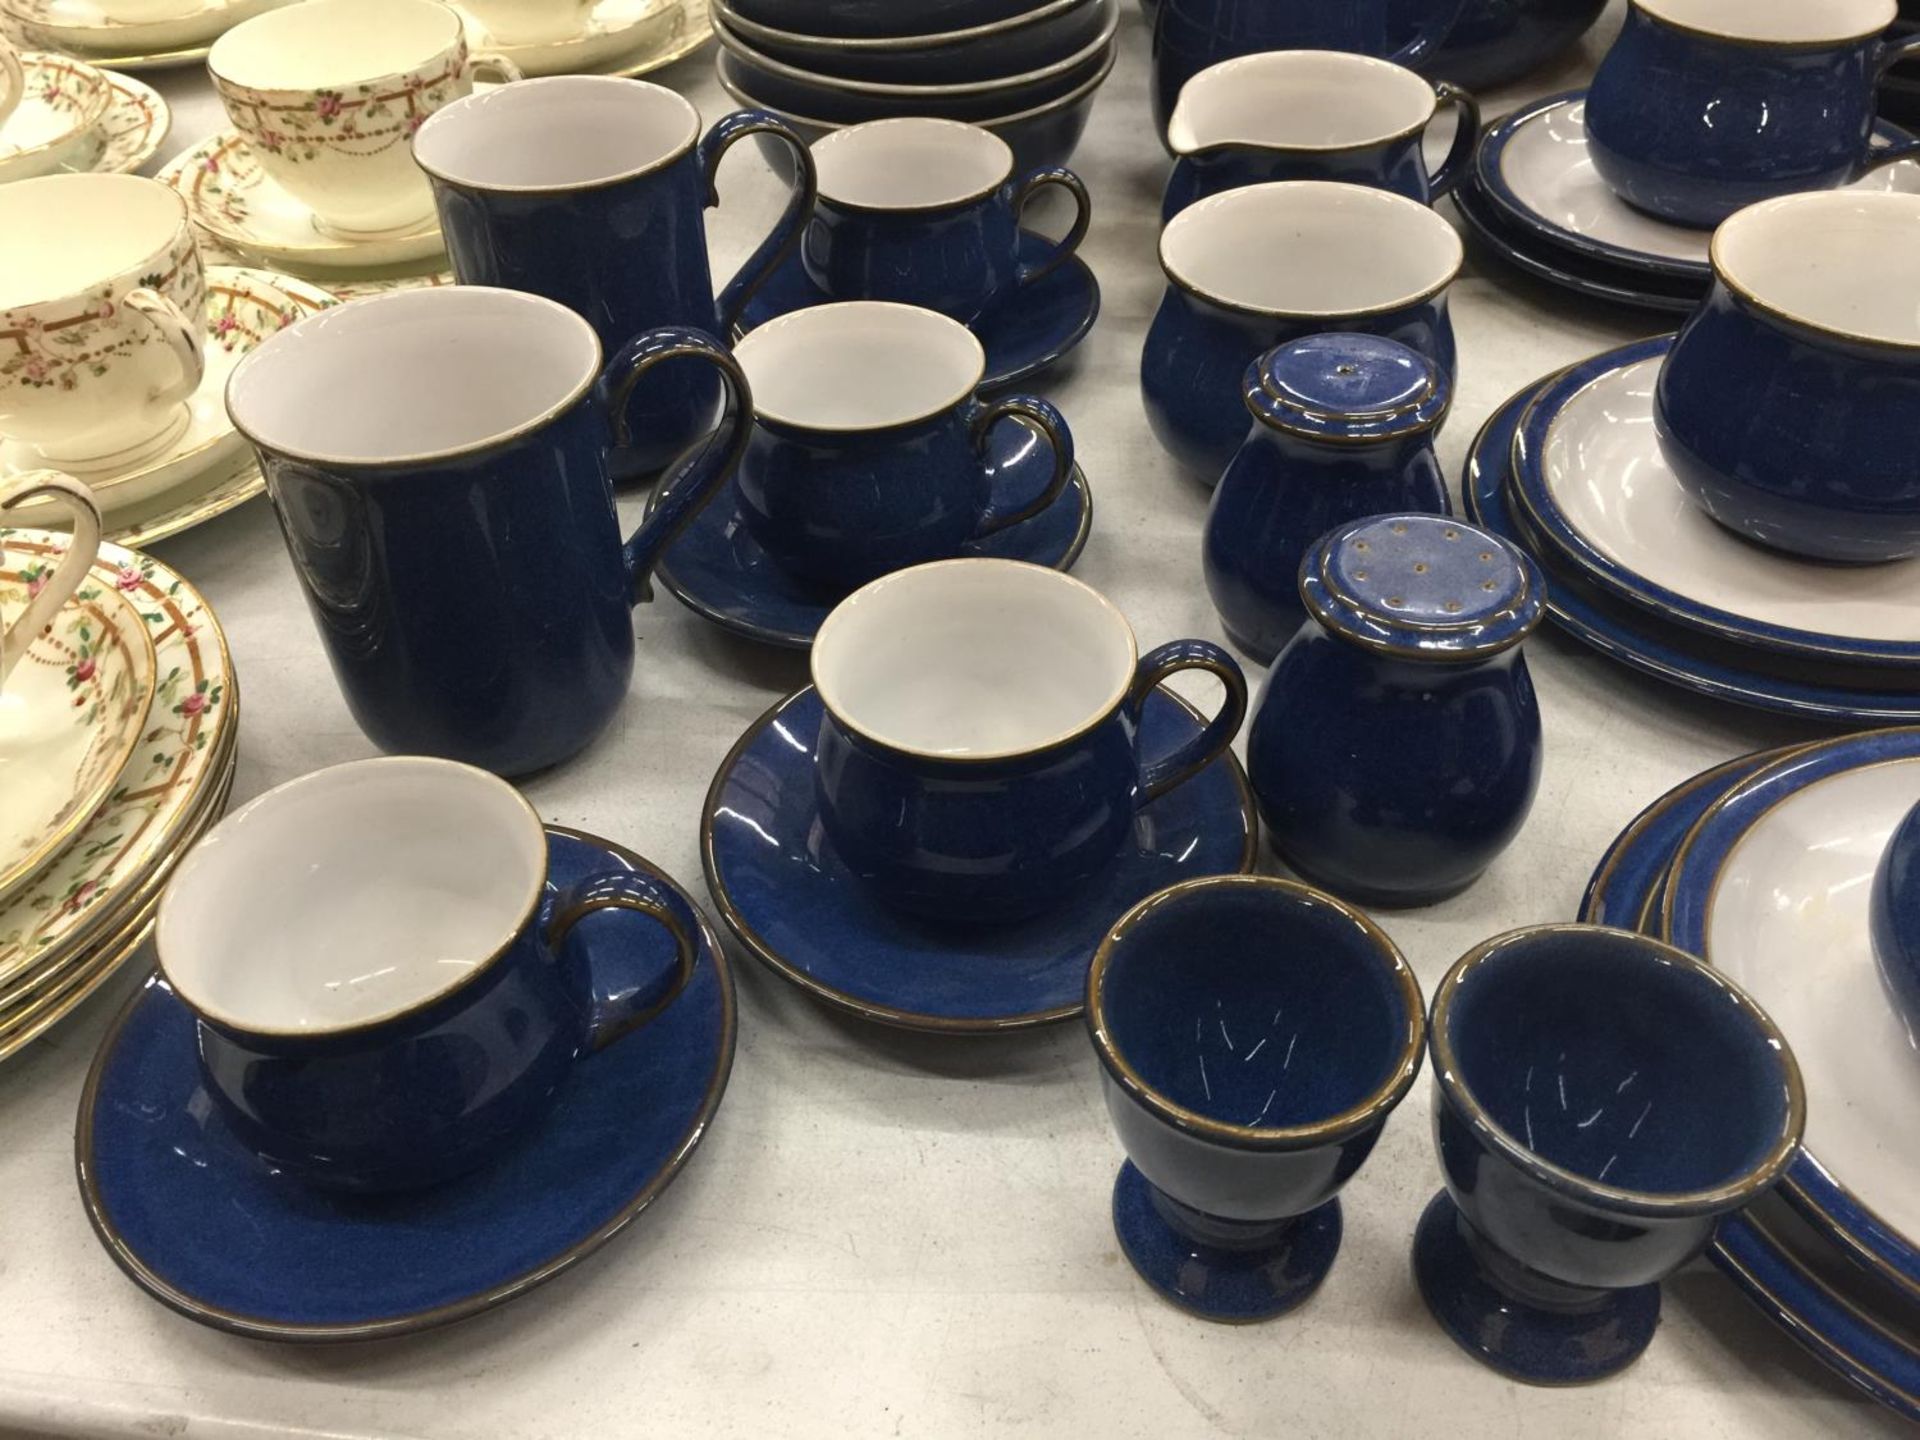 A DENBY DINNER SERVICE IN BLUE TO INCLUDE PLATES, BOWLS, TEAPOTS, SERVING TUREEN, MILK JUGS, SUGAR - Image 3 of 9